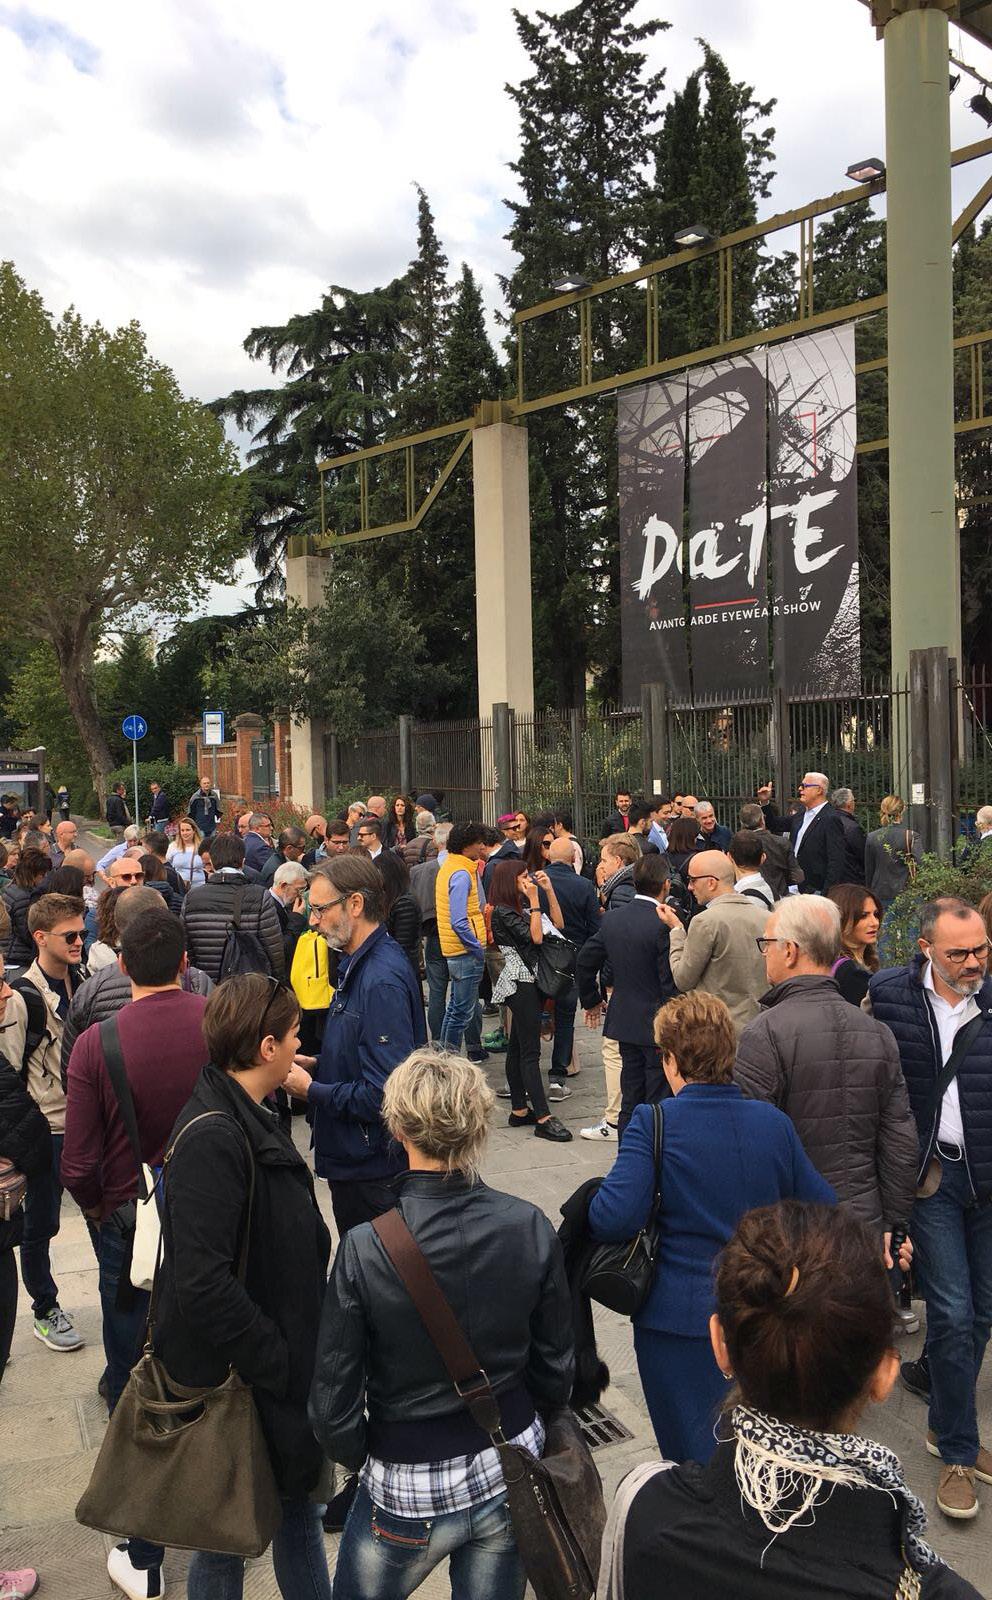 Issue #93 September 27th 2017 A tremendous success for DaTE The edition on show from 23-25 September at the Stazione Leopolda in Florence ended with a +40% increase of professional visitors.